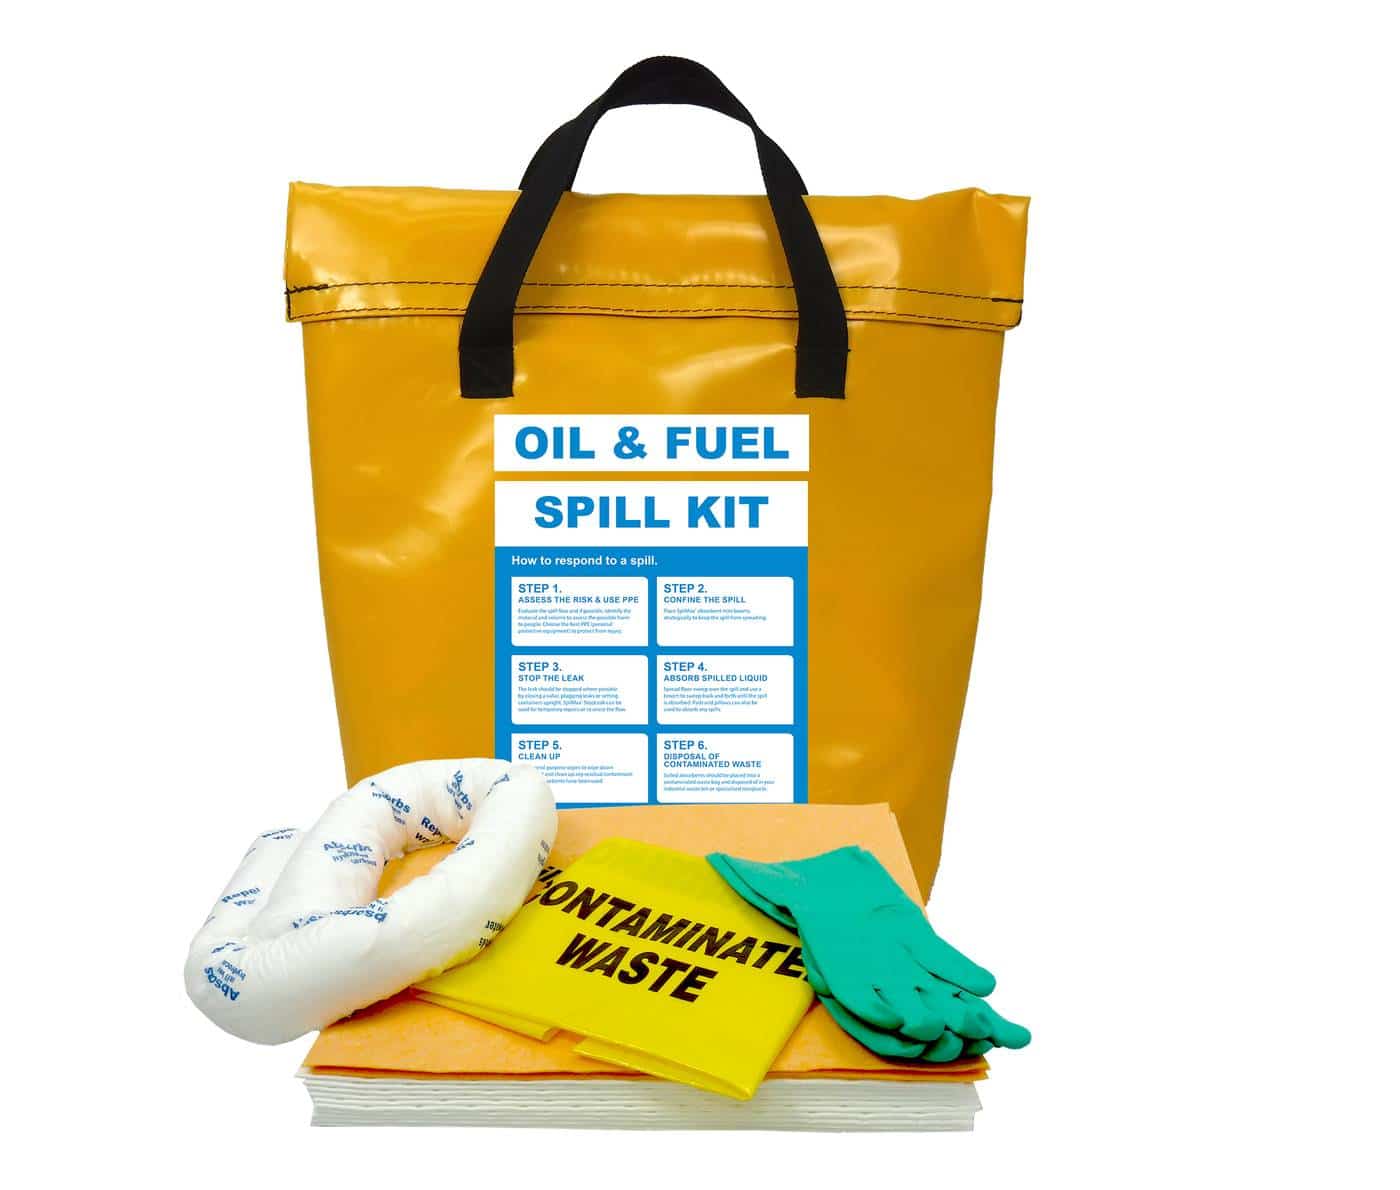 SpilMax 25L Oil & Fuel Vehicle Spill Kit Bag with contents showing